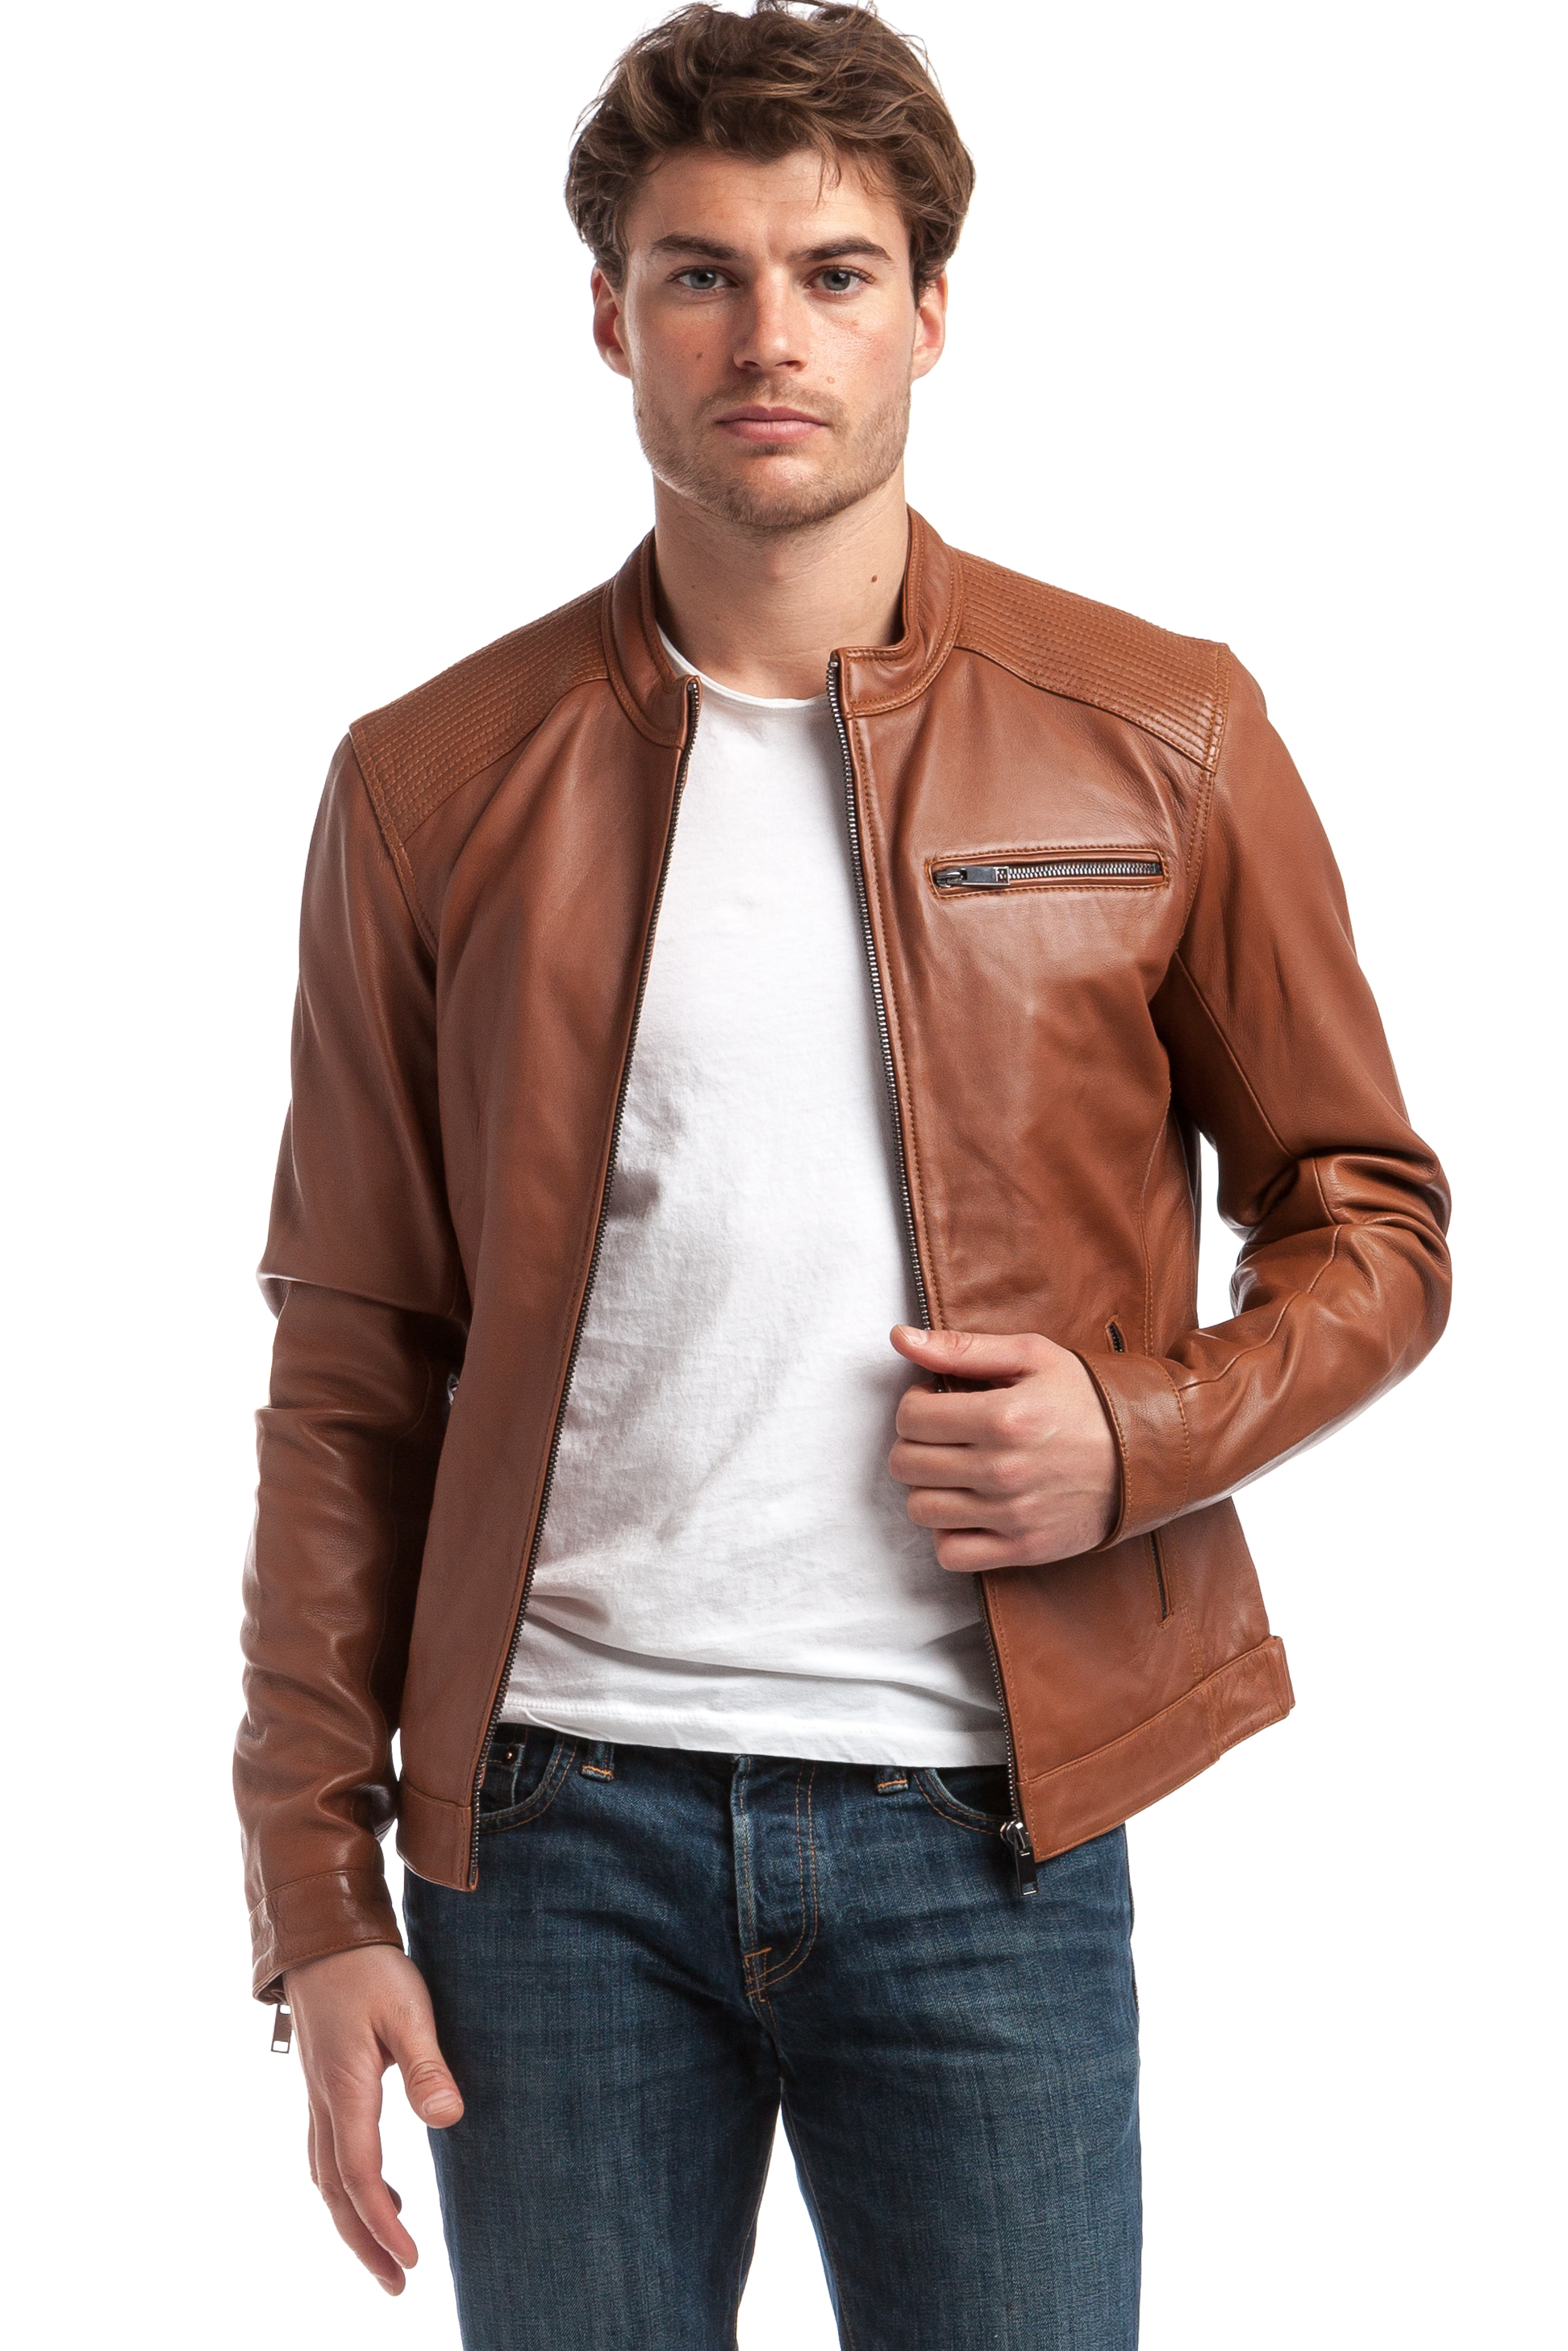 Chyston on Twitter: "Alban Men's Round Neck Jacket Black - Chyston Leather Dry clean only 100% Polyester jacket #mencollection #clothes #clothingbrand #clothesaddict #fashionstyle #jackets #clothesforsale #clothesformen #mensfashion ...